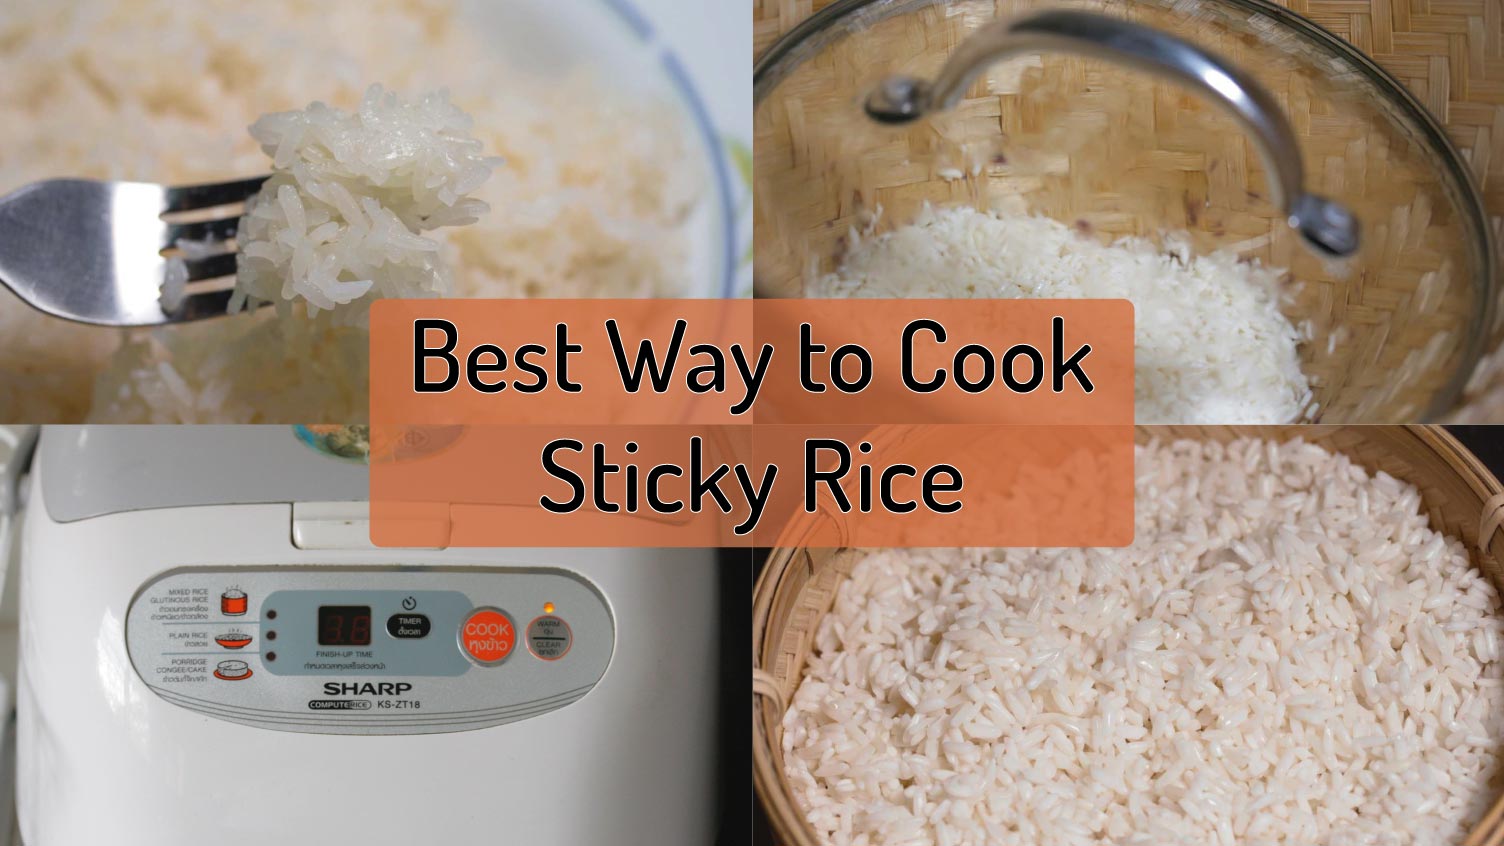 How to Cook Thai/Lao Sticky Rice without a Steamer